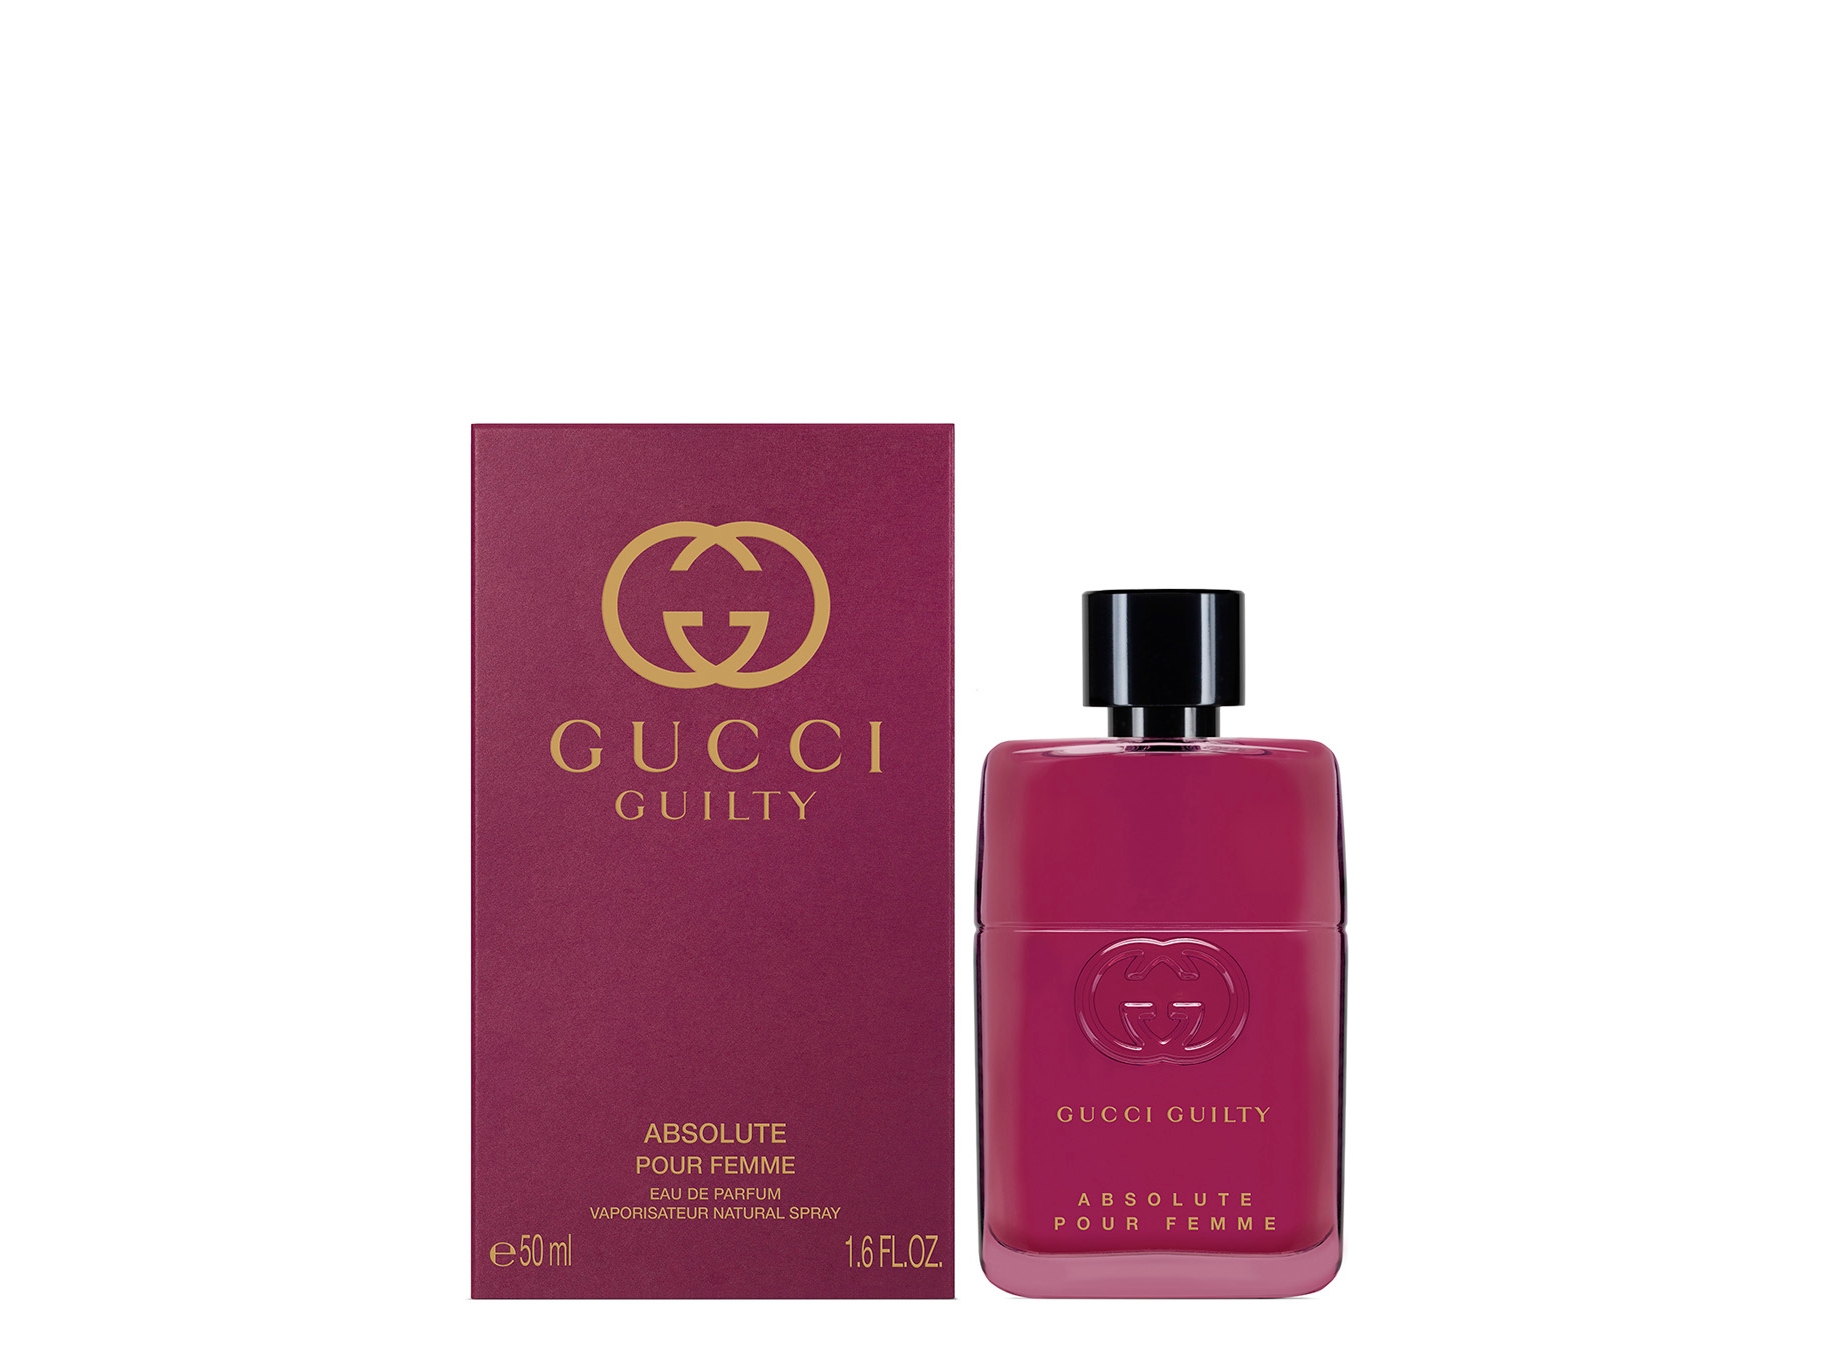 Gucci guilty absolute pour femme EDP 50ml. Gucci guilty absolute pour femme. Гуччи Абсолют женские. Парфюм Shaik Gucci guilty absolute.